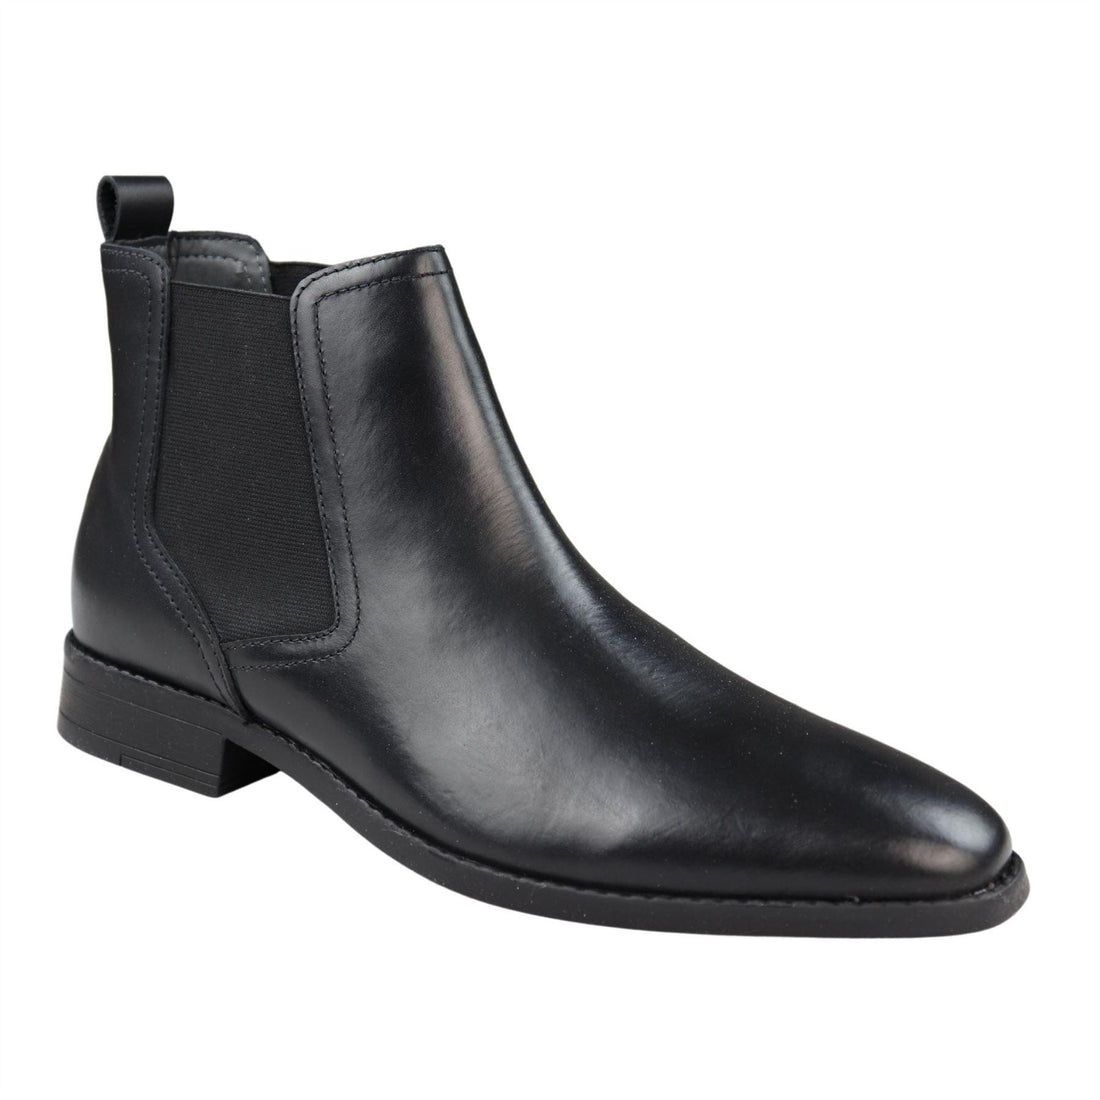 Mens Black Slip On Chelsea Boots Real Leather Smart Casual - Knighthood Store